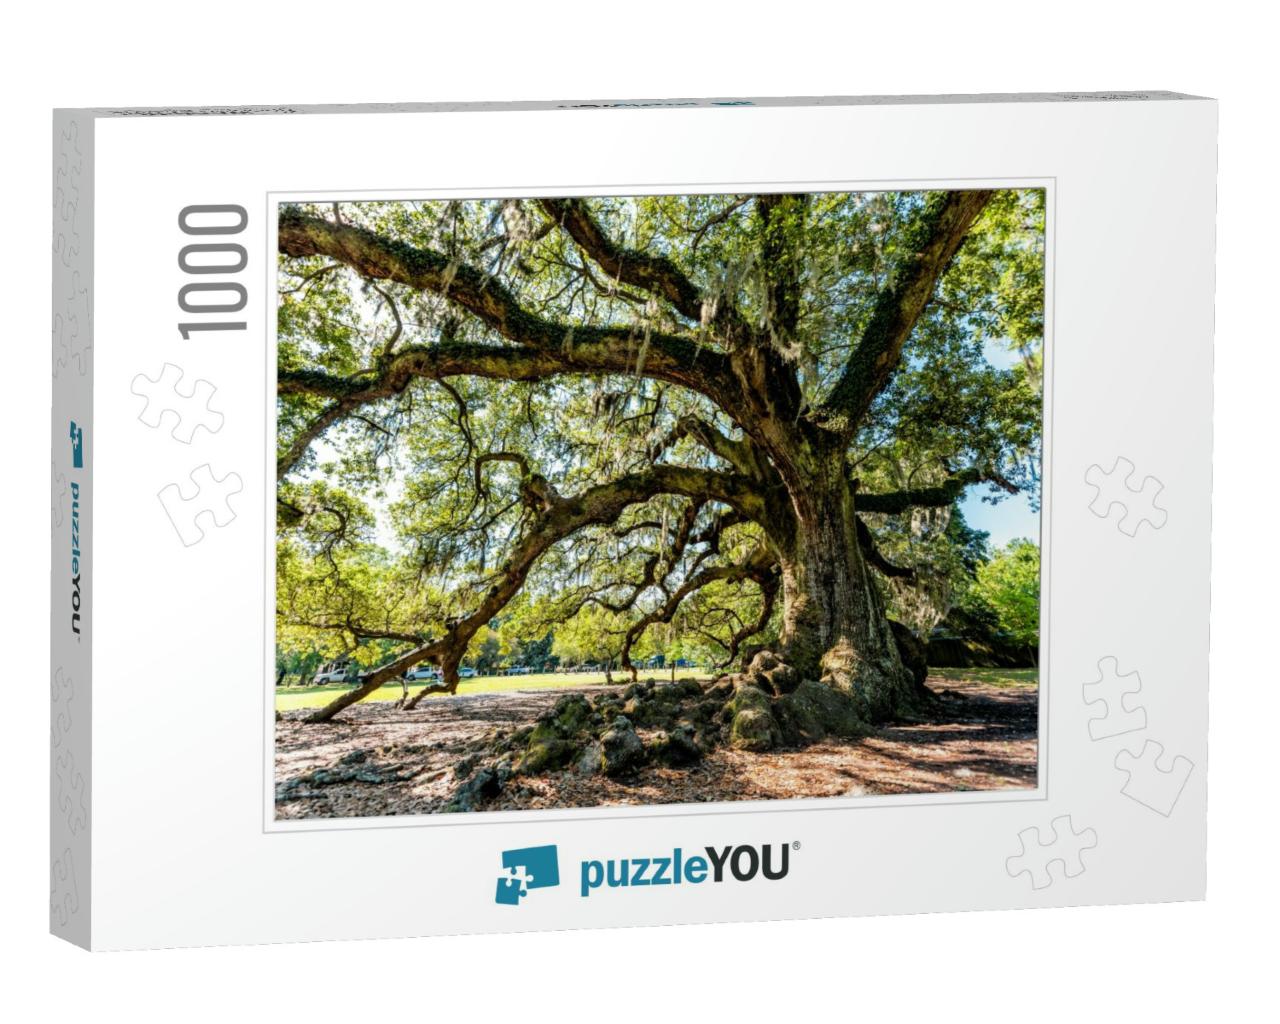 Oldest Southern Live Oak in New Orleans Audubon Park on S... Jigsaw Puzzle with 1000 pieces